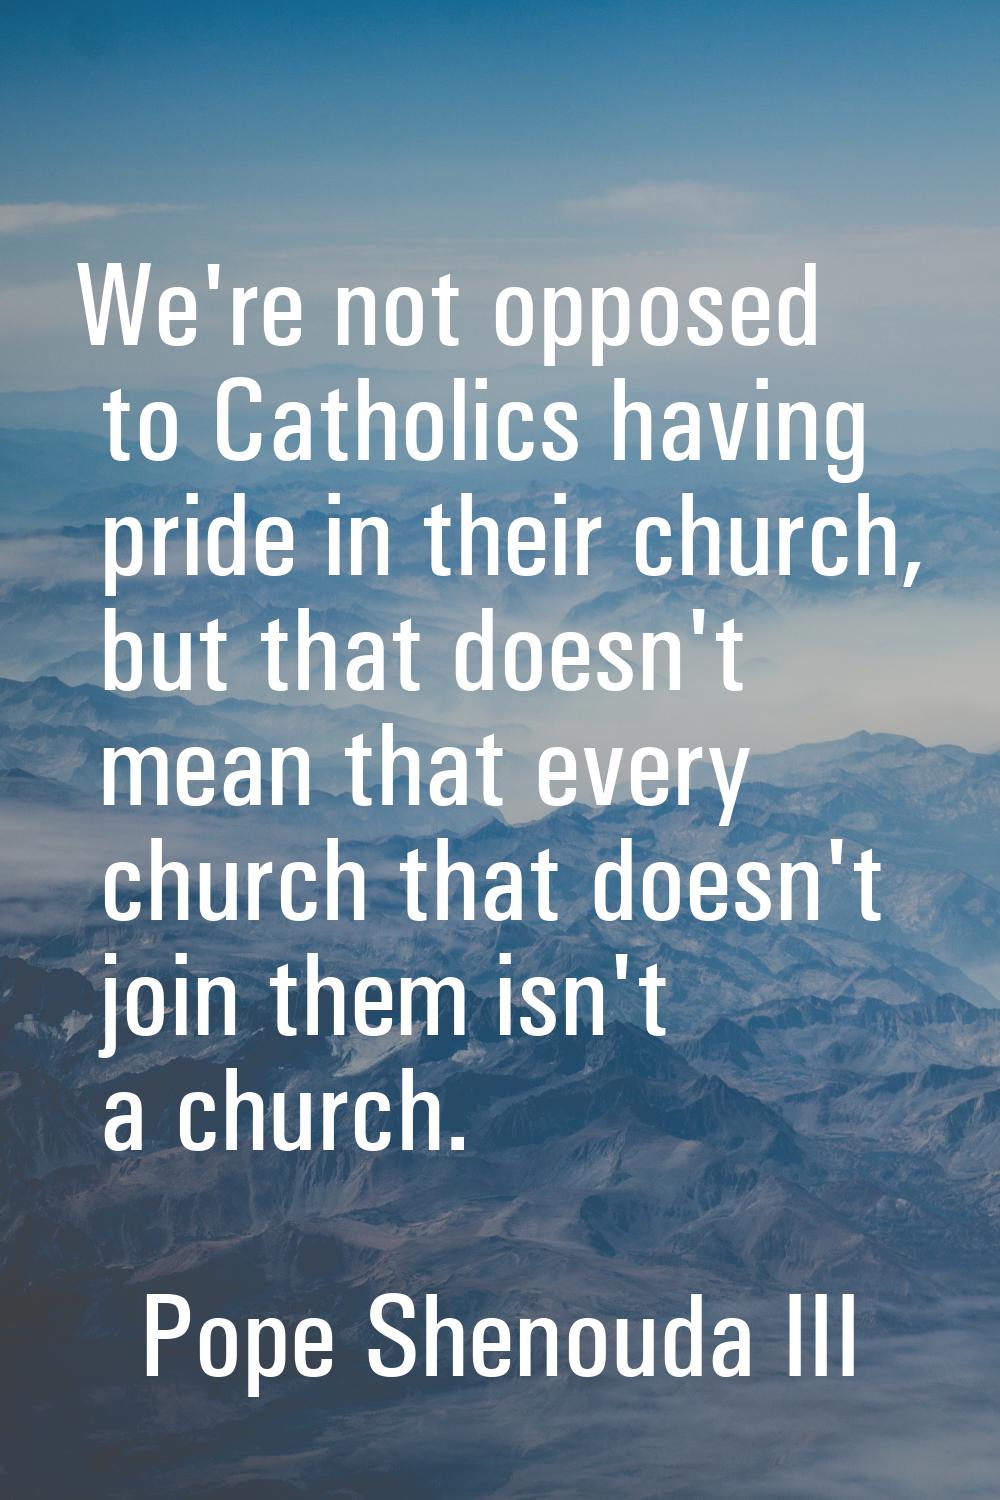 We're not opposed to Catholics having pride in their church, but that doesn't mean that every churc